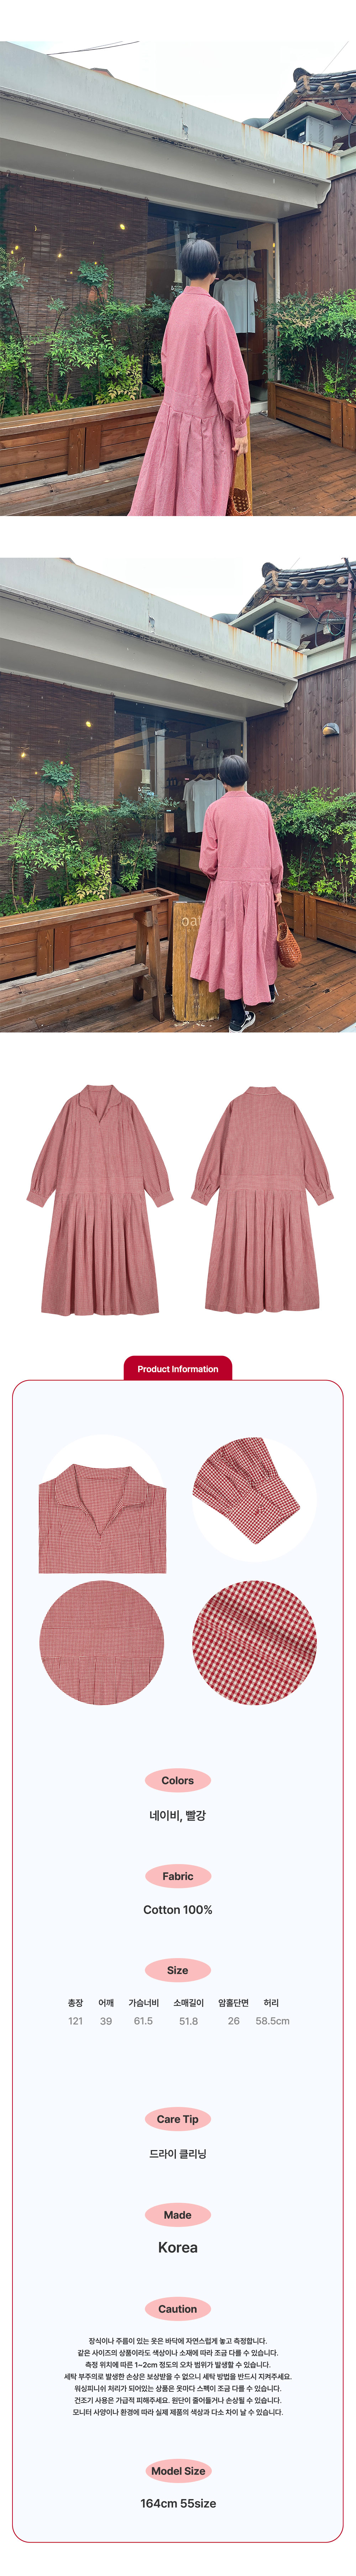 gingham_check_pleats_dress_red03